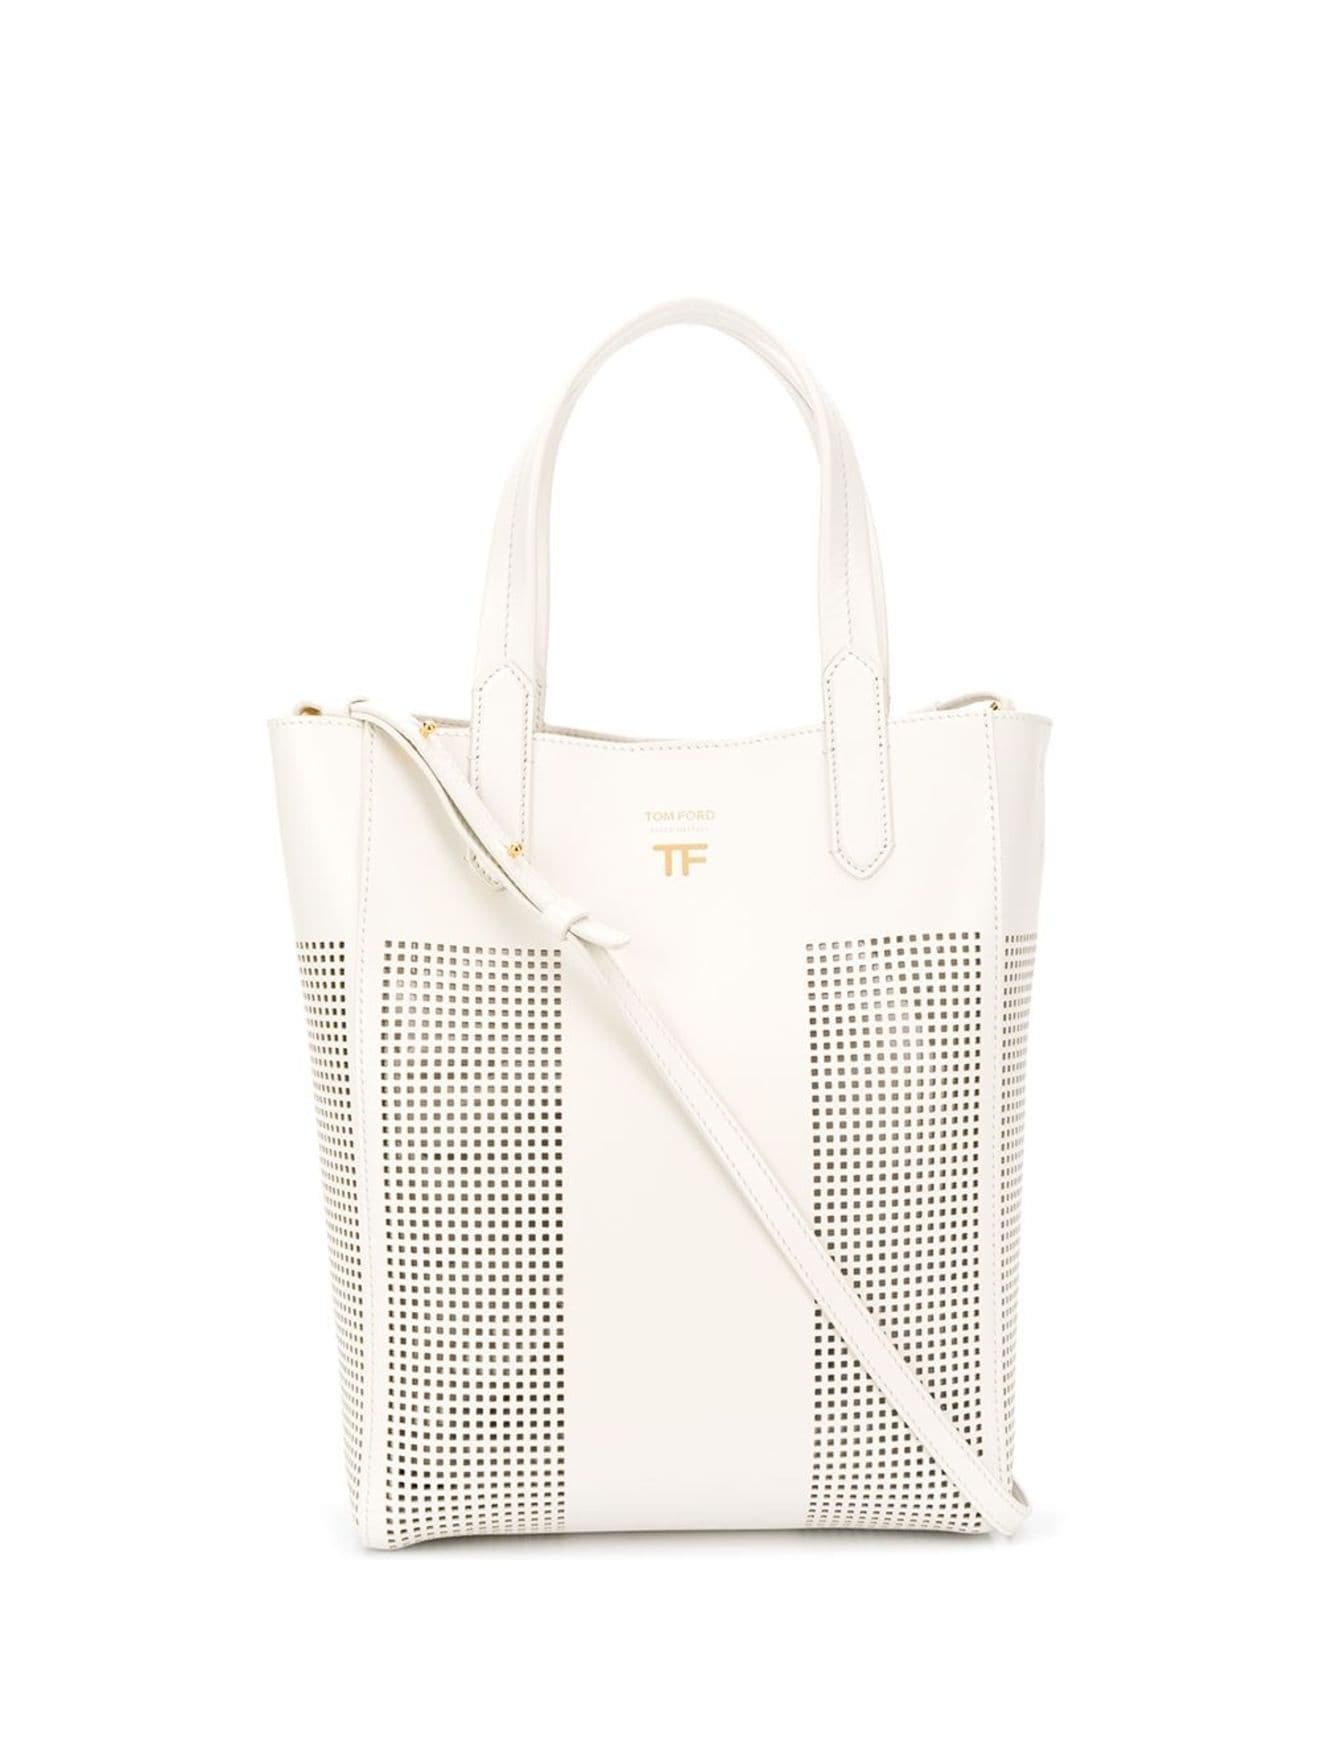 TOM FORD perforated tote bag white | MODES